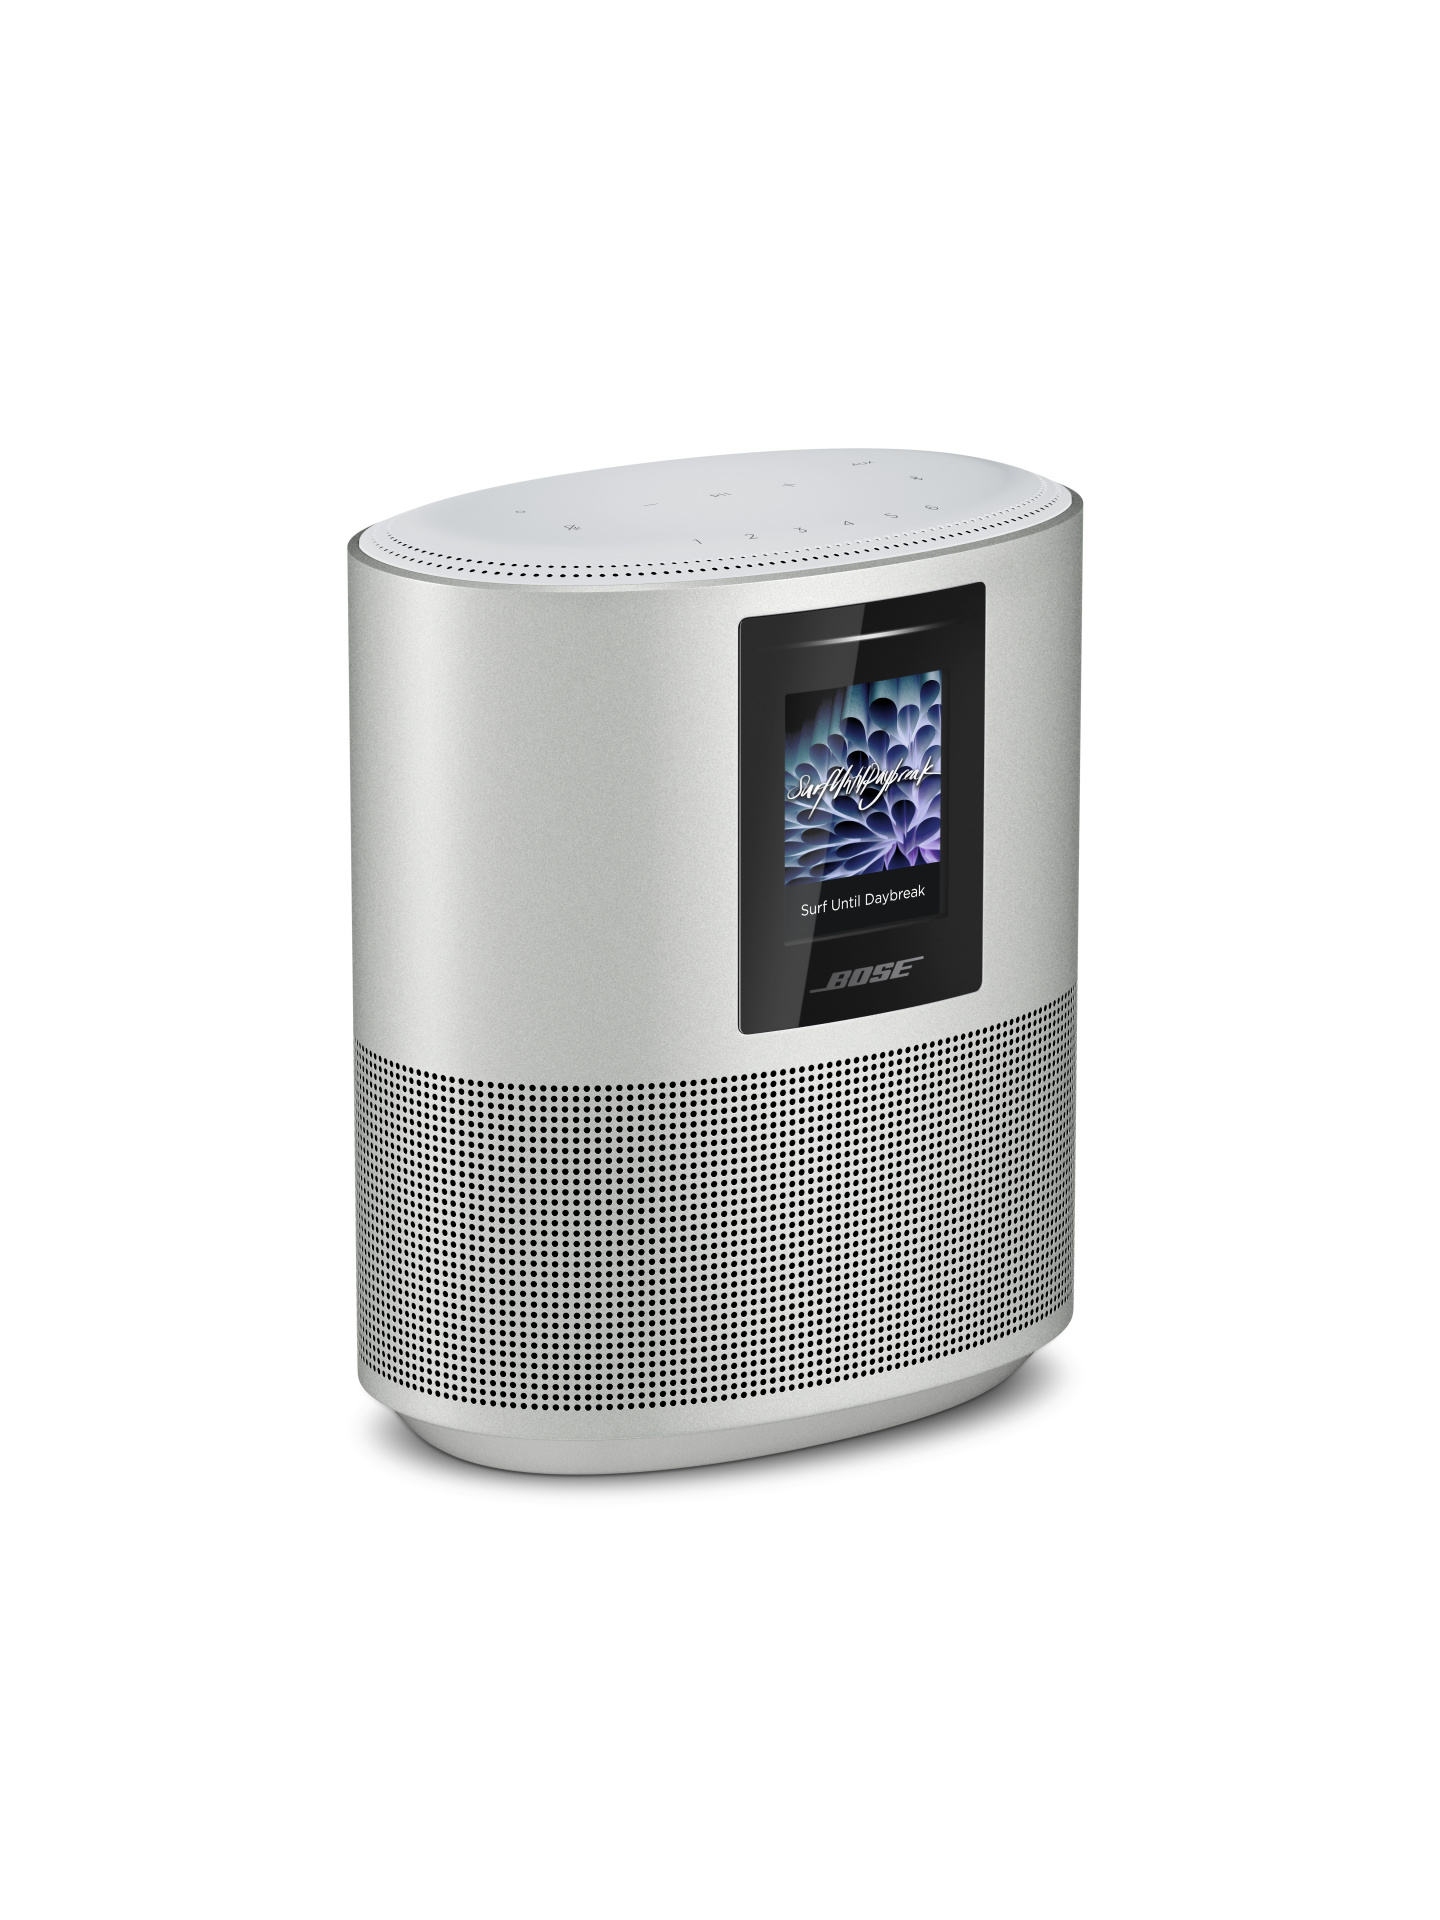 Bose Smart Speaker 500 with Wi-Fi, Bluetooth and Voice Control Built-in, Silver - image 2 of 6